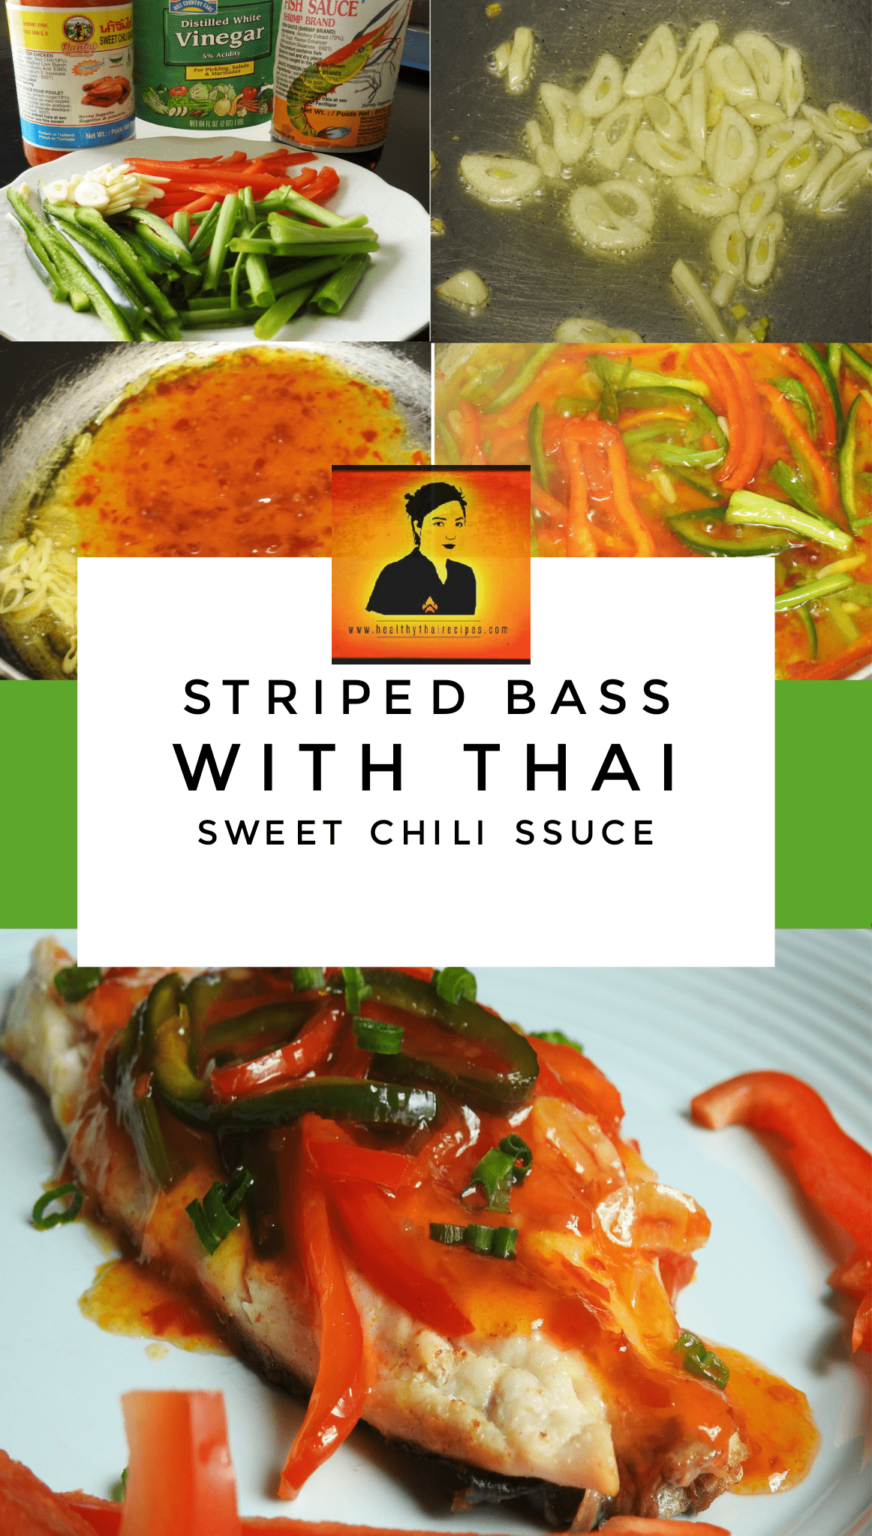 Striped Bass with Thai Chili Sauce